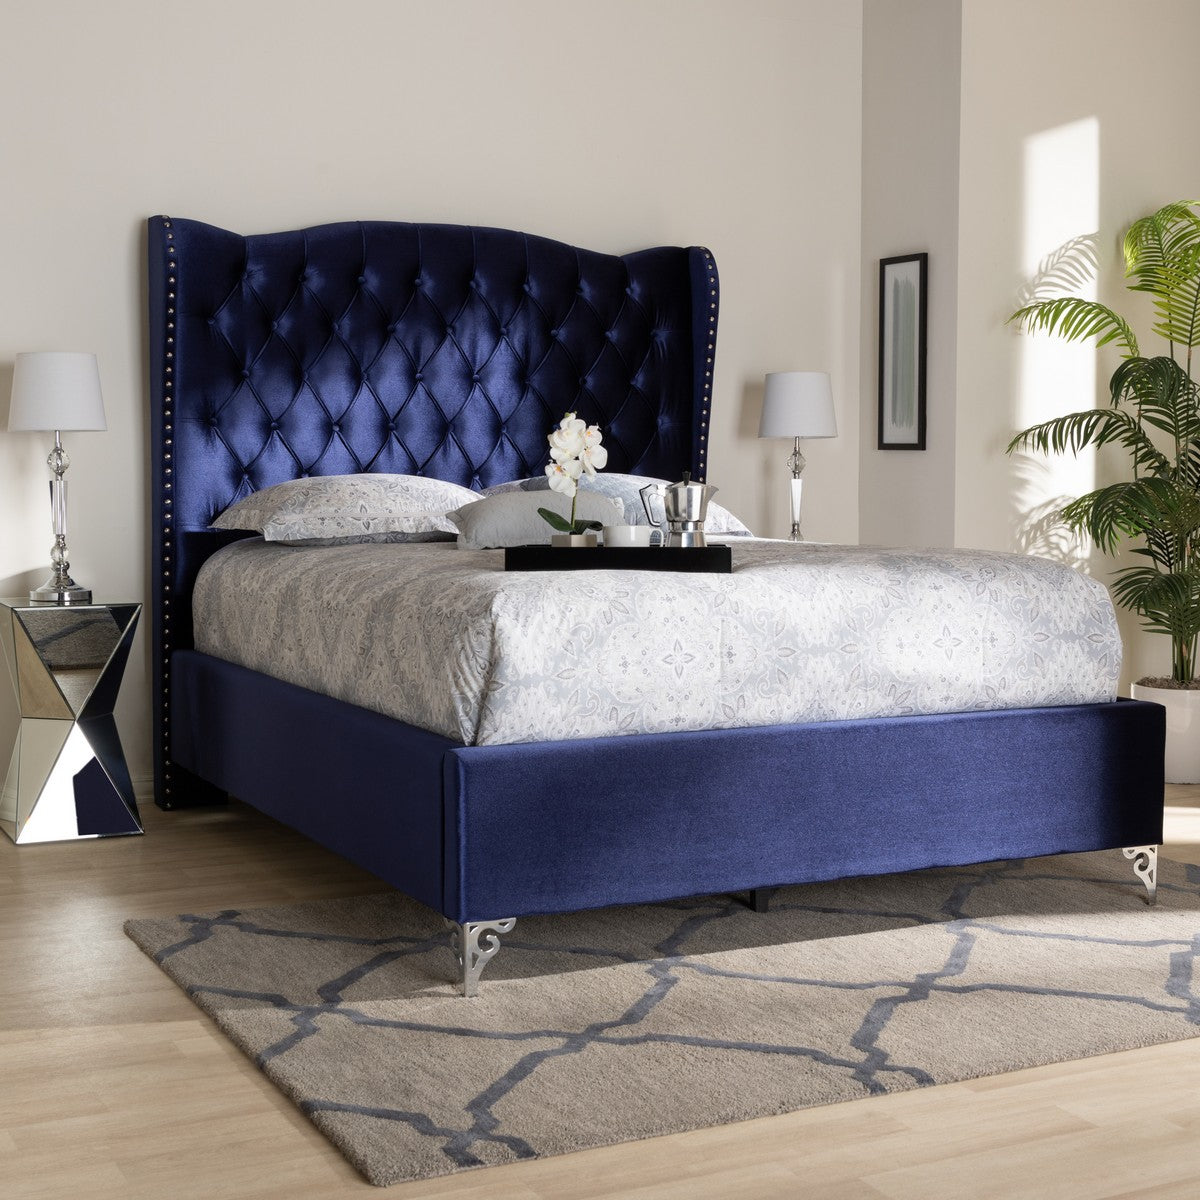 Baxton Studio Hanne Glam and Luxe Purple Blue Velvet Fabric Upholstered King Size Wingback Bed